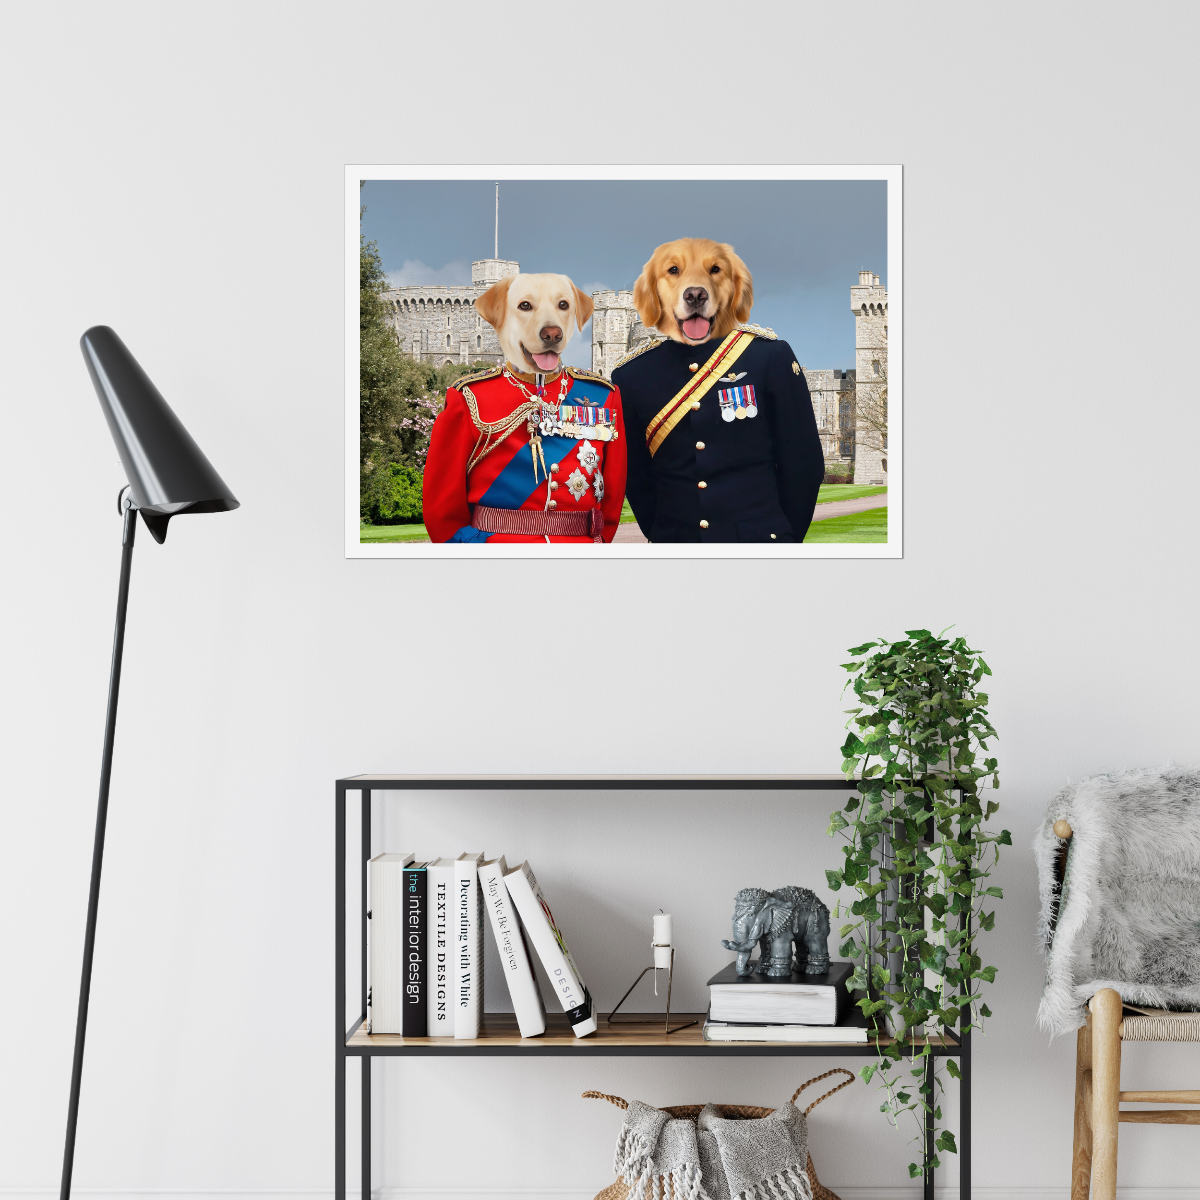 Paw & Glory, paw and glory, dog portraits as humans, custom pet paintings, cat picture painting, dog and couple portrait, aristocrat dog painting, animal portrait pictures, pet portraits